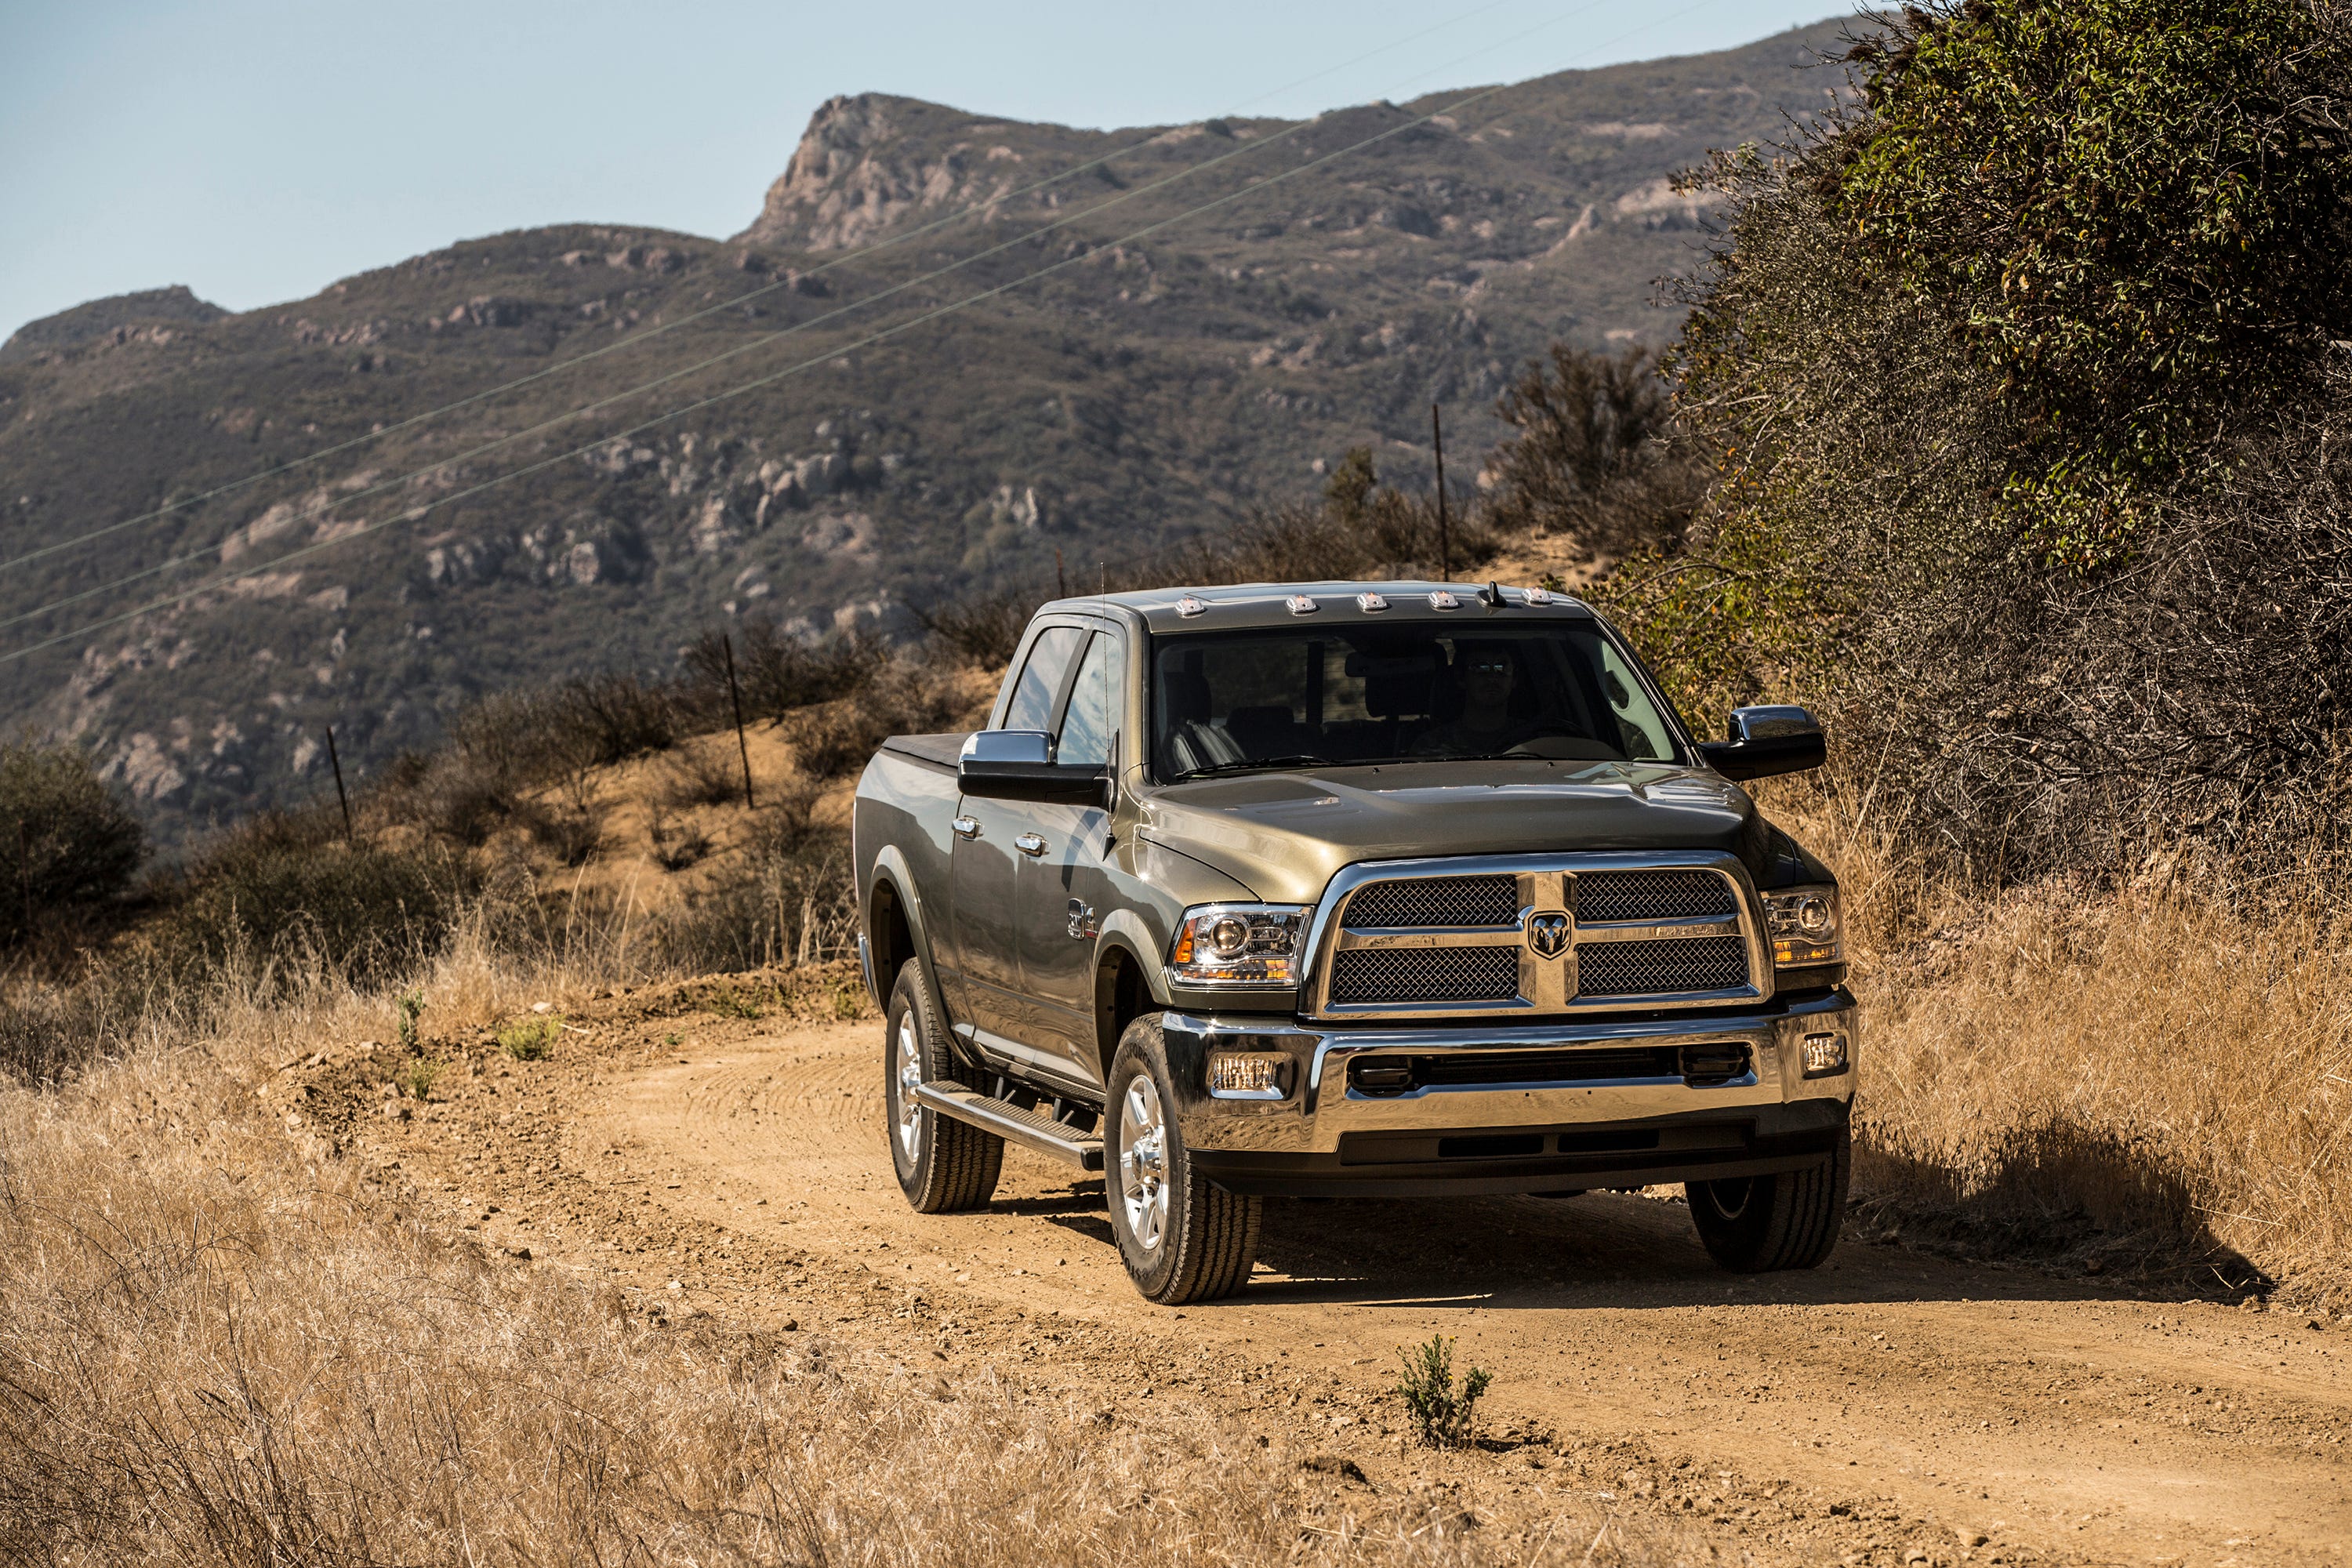 The 2017 Ram 2500 Laramie Longhorn Crew Cab 4x4 Heavy Duty was offered with a Cummins Diesel engine. FCA said its posted  third quarters earnings loss reflected an estimated $794 million charge related to a U.S. Department of Justice investigation that alleges the automaker failed to disclose software on about 104,000 diesel-powered pickups and SUVs that regulators said could be similar to the “defeat devices” Volkswagen AG used to cheat emissions-testing.